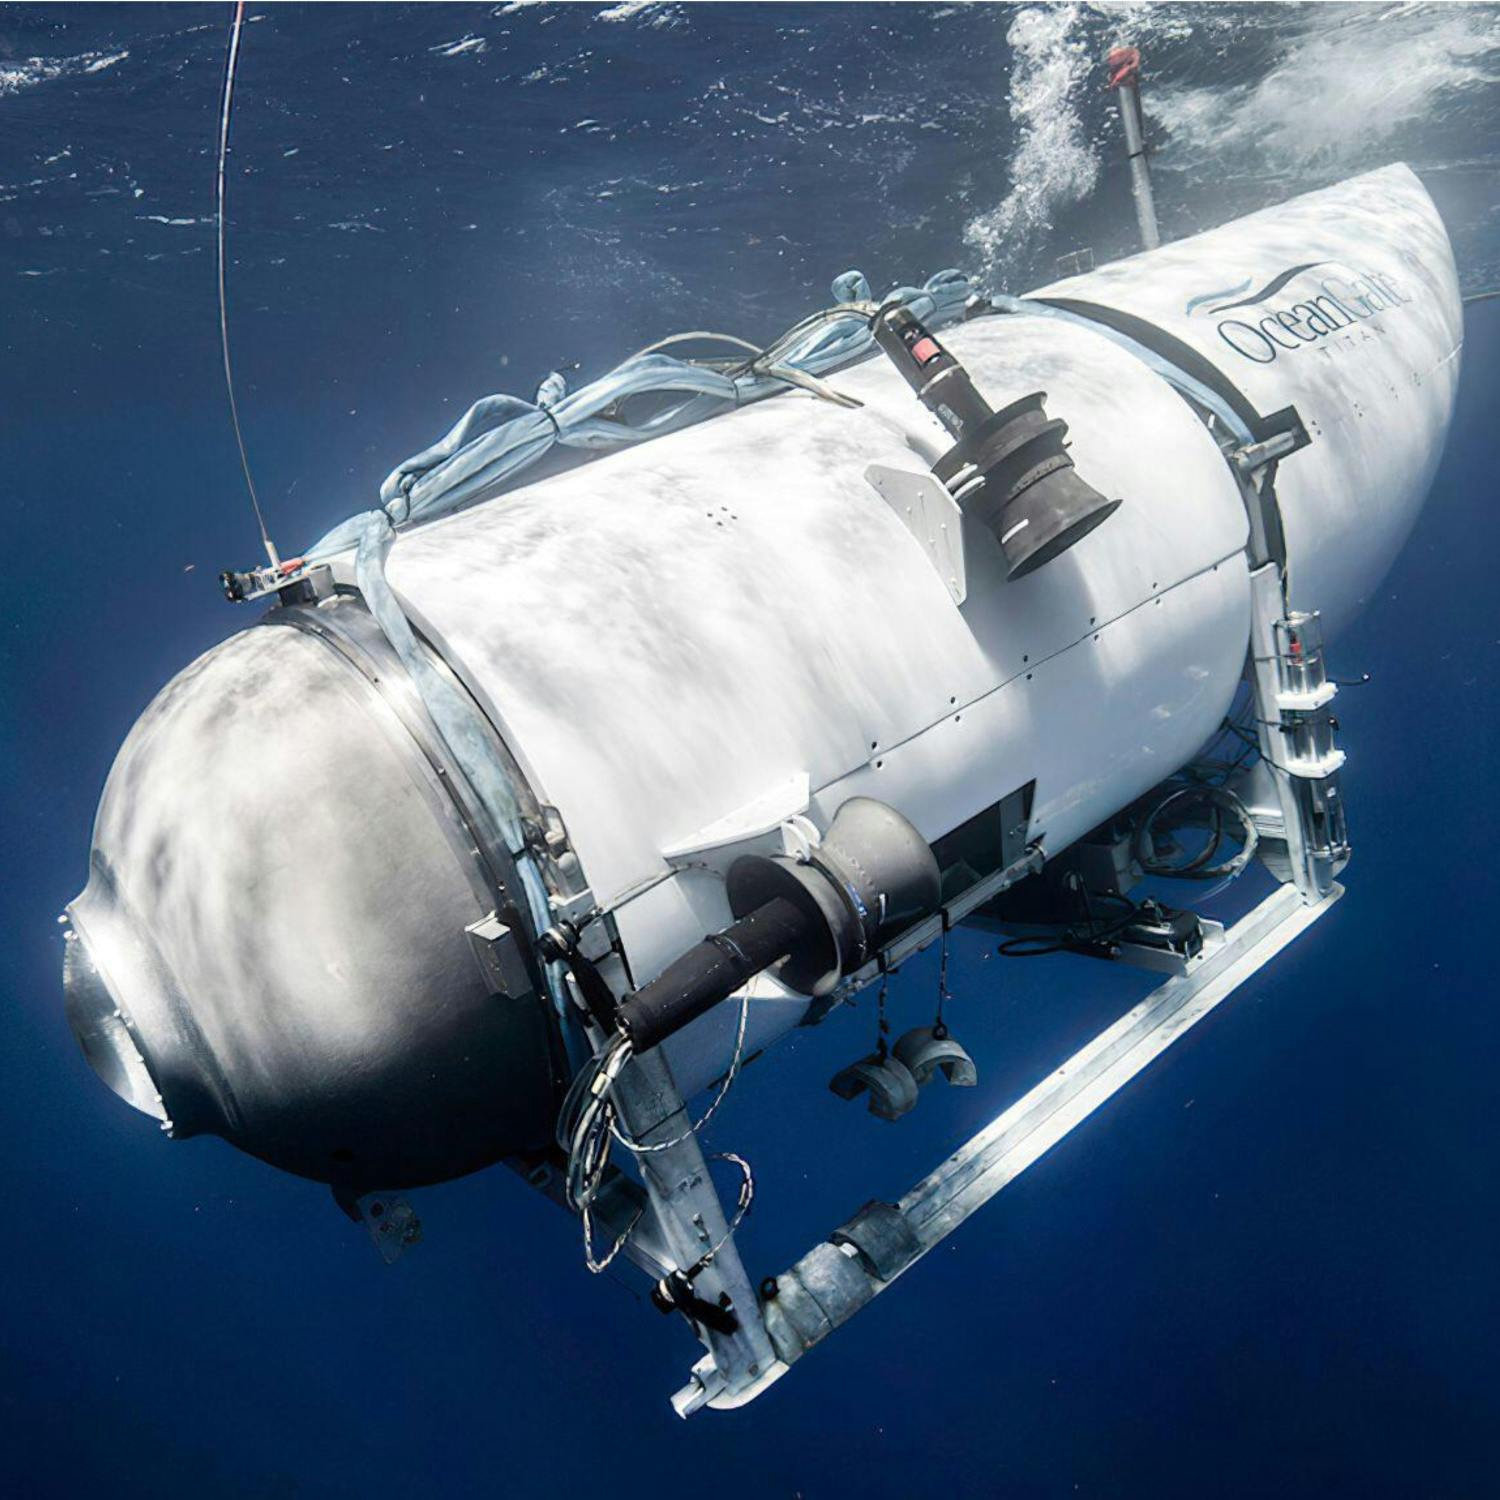 Everything We Know About The Missing 'Titan' Submersible